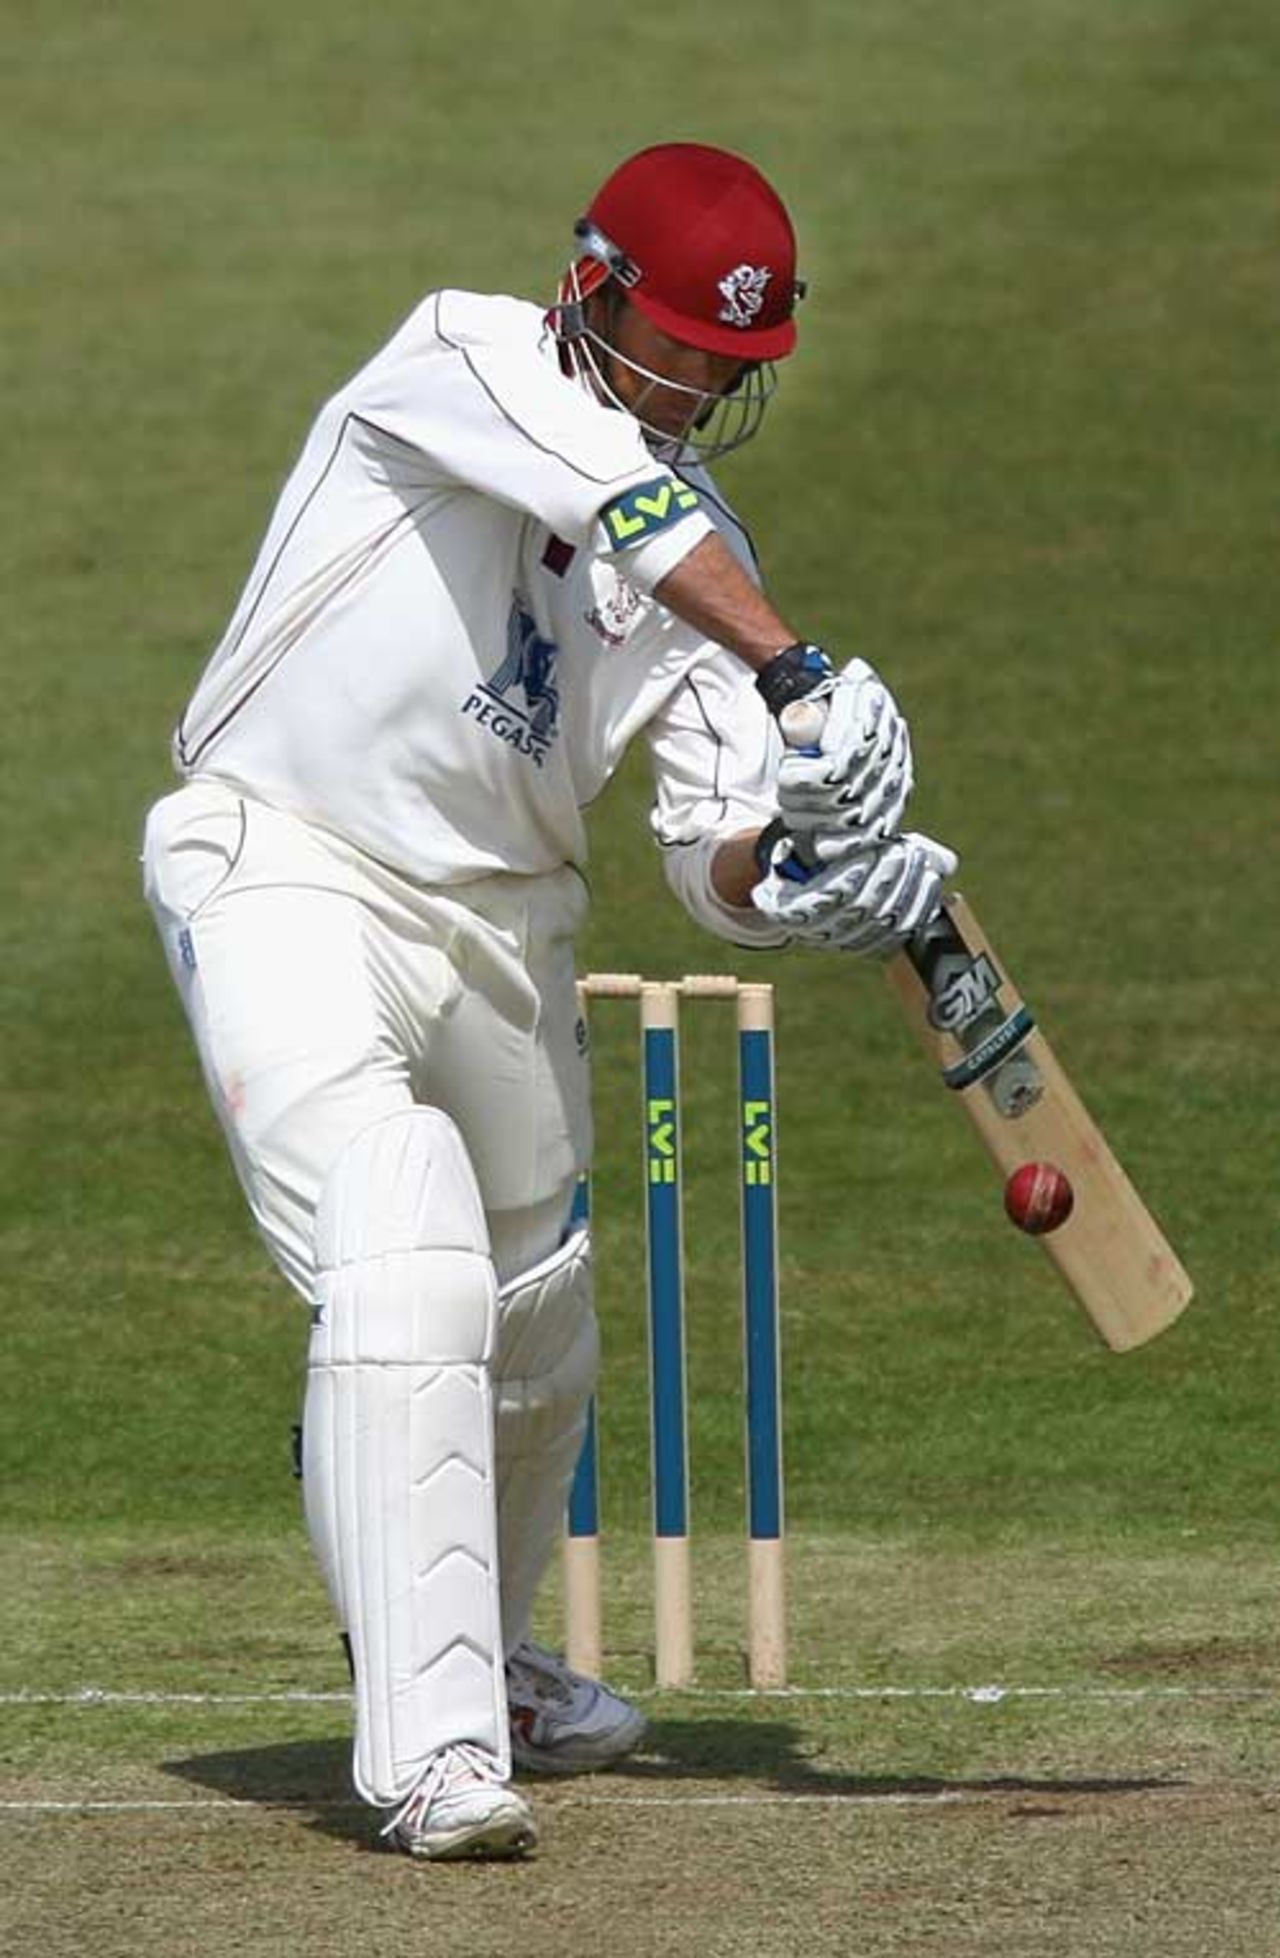 Marcus Trescothick shapes to drive as he continues his promising form, Northamptonshire v Somerset, County Championship, Division Two, Northampton, May 8, 2007